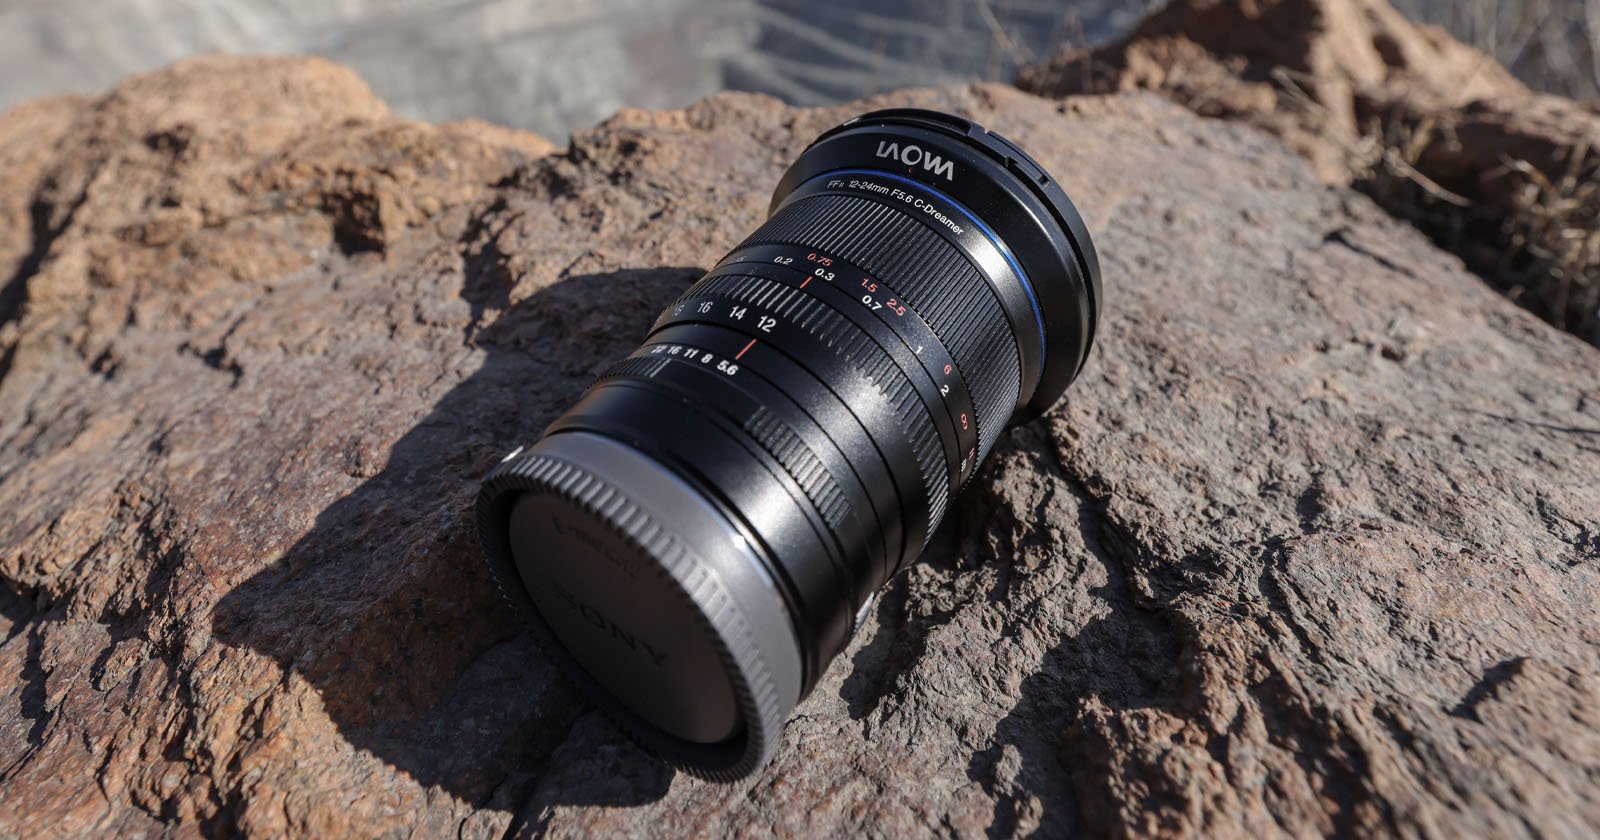 The Laowa 12-24mm f/5.6 is a Compact Zoom for Full Frame Cameras